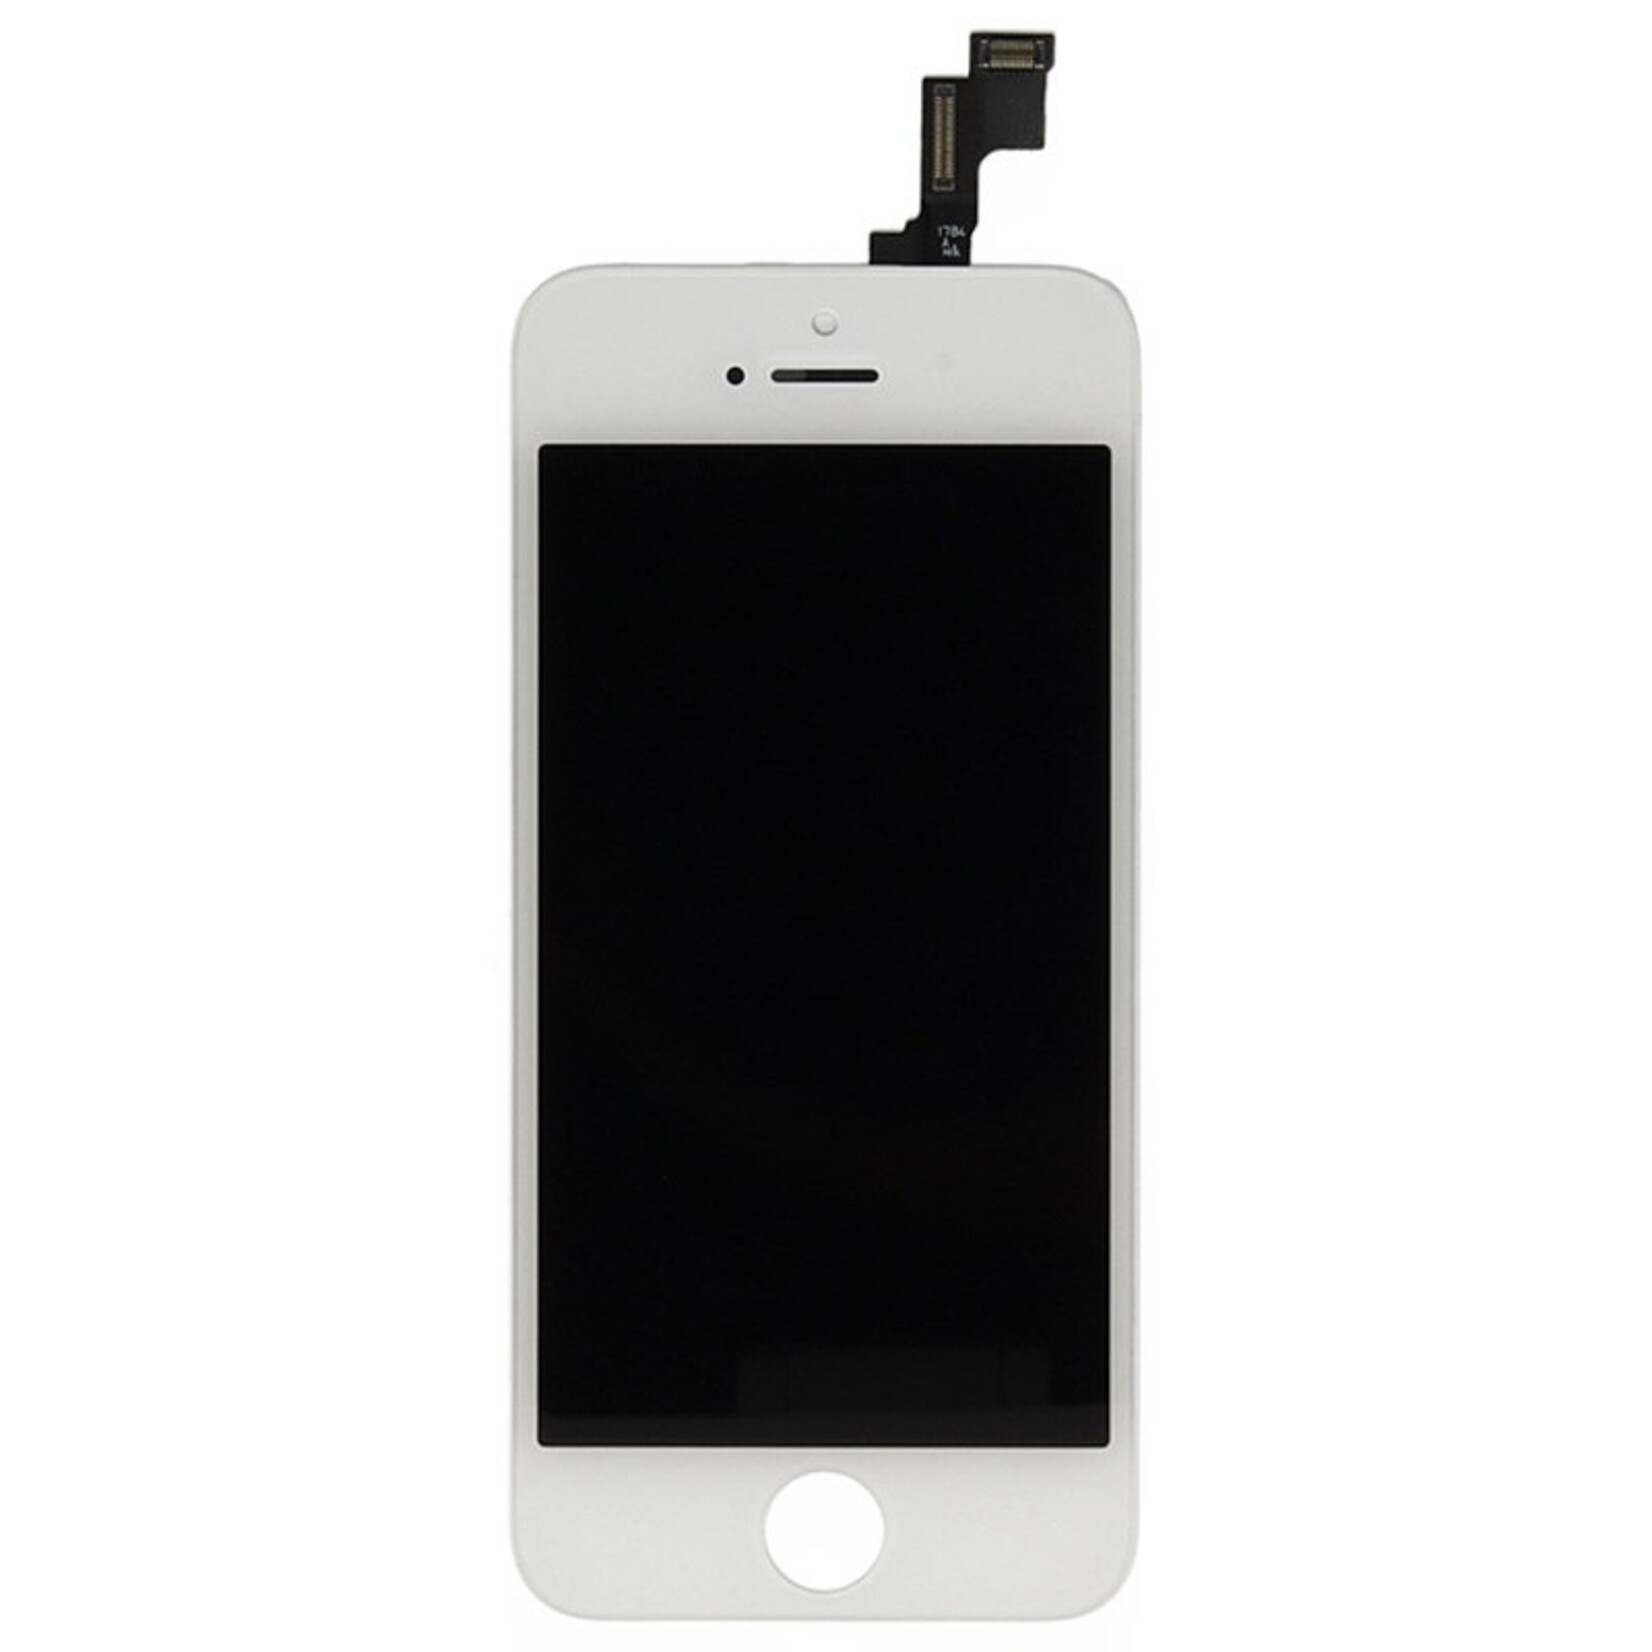 Apple USAGÉ / USED LCD DIGITIZER ASSEMBLY POUR IPHONE 5S / SE BLANC WHITE